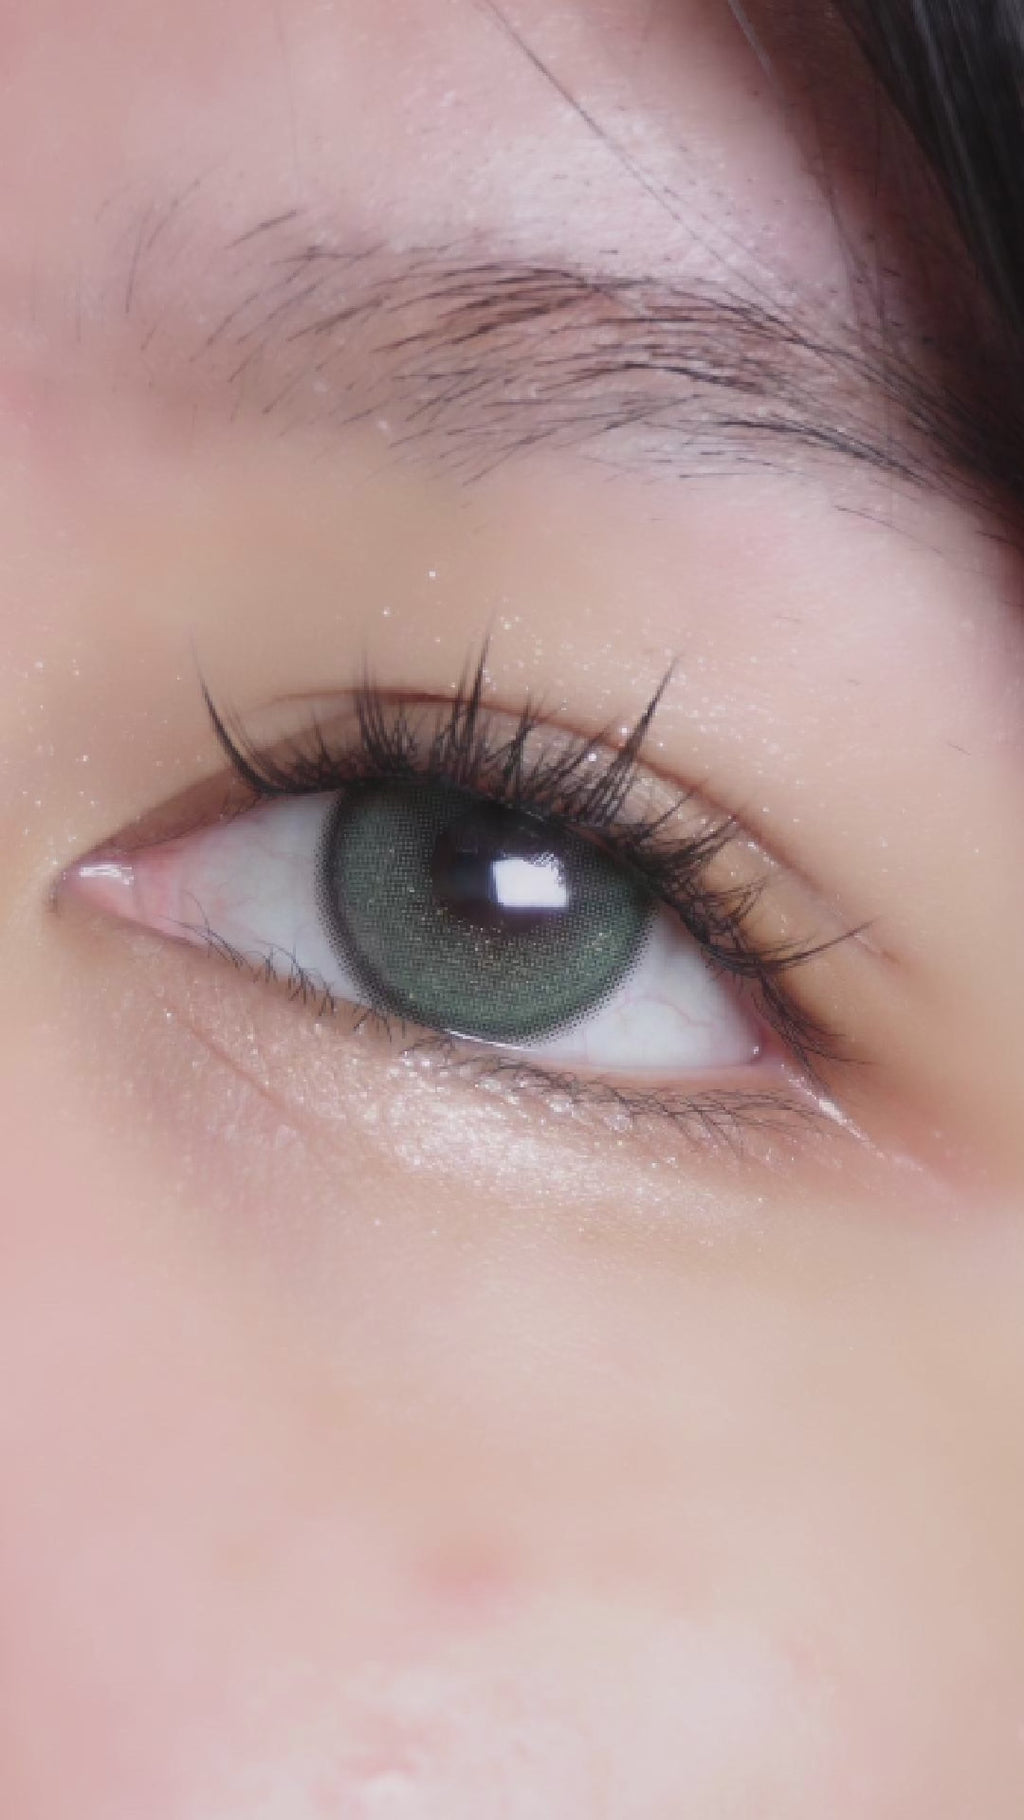 Model putting on the Winkly Green colored contacts on naturally dark eyes, showing the natural enlarging effect of the prescription circle lens, paired with simple lash extensions.